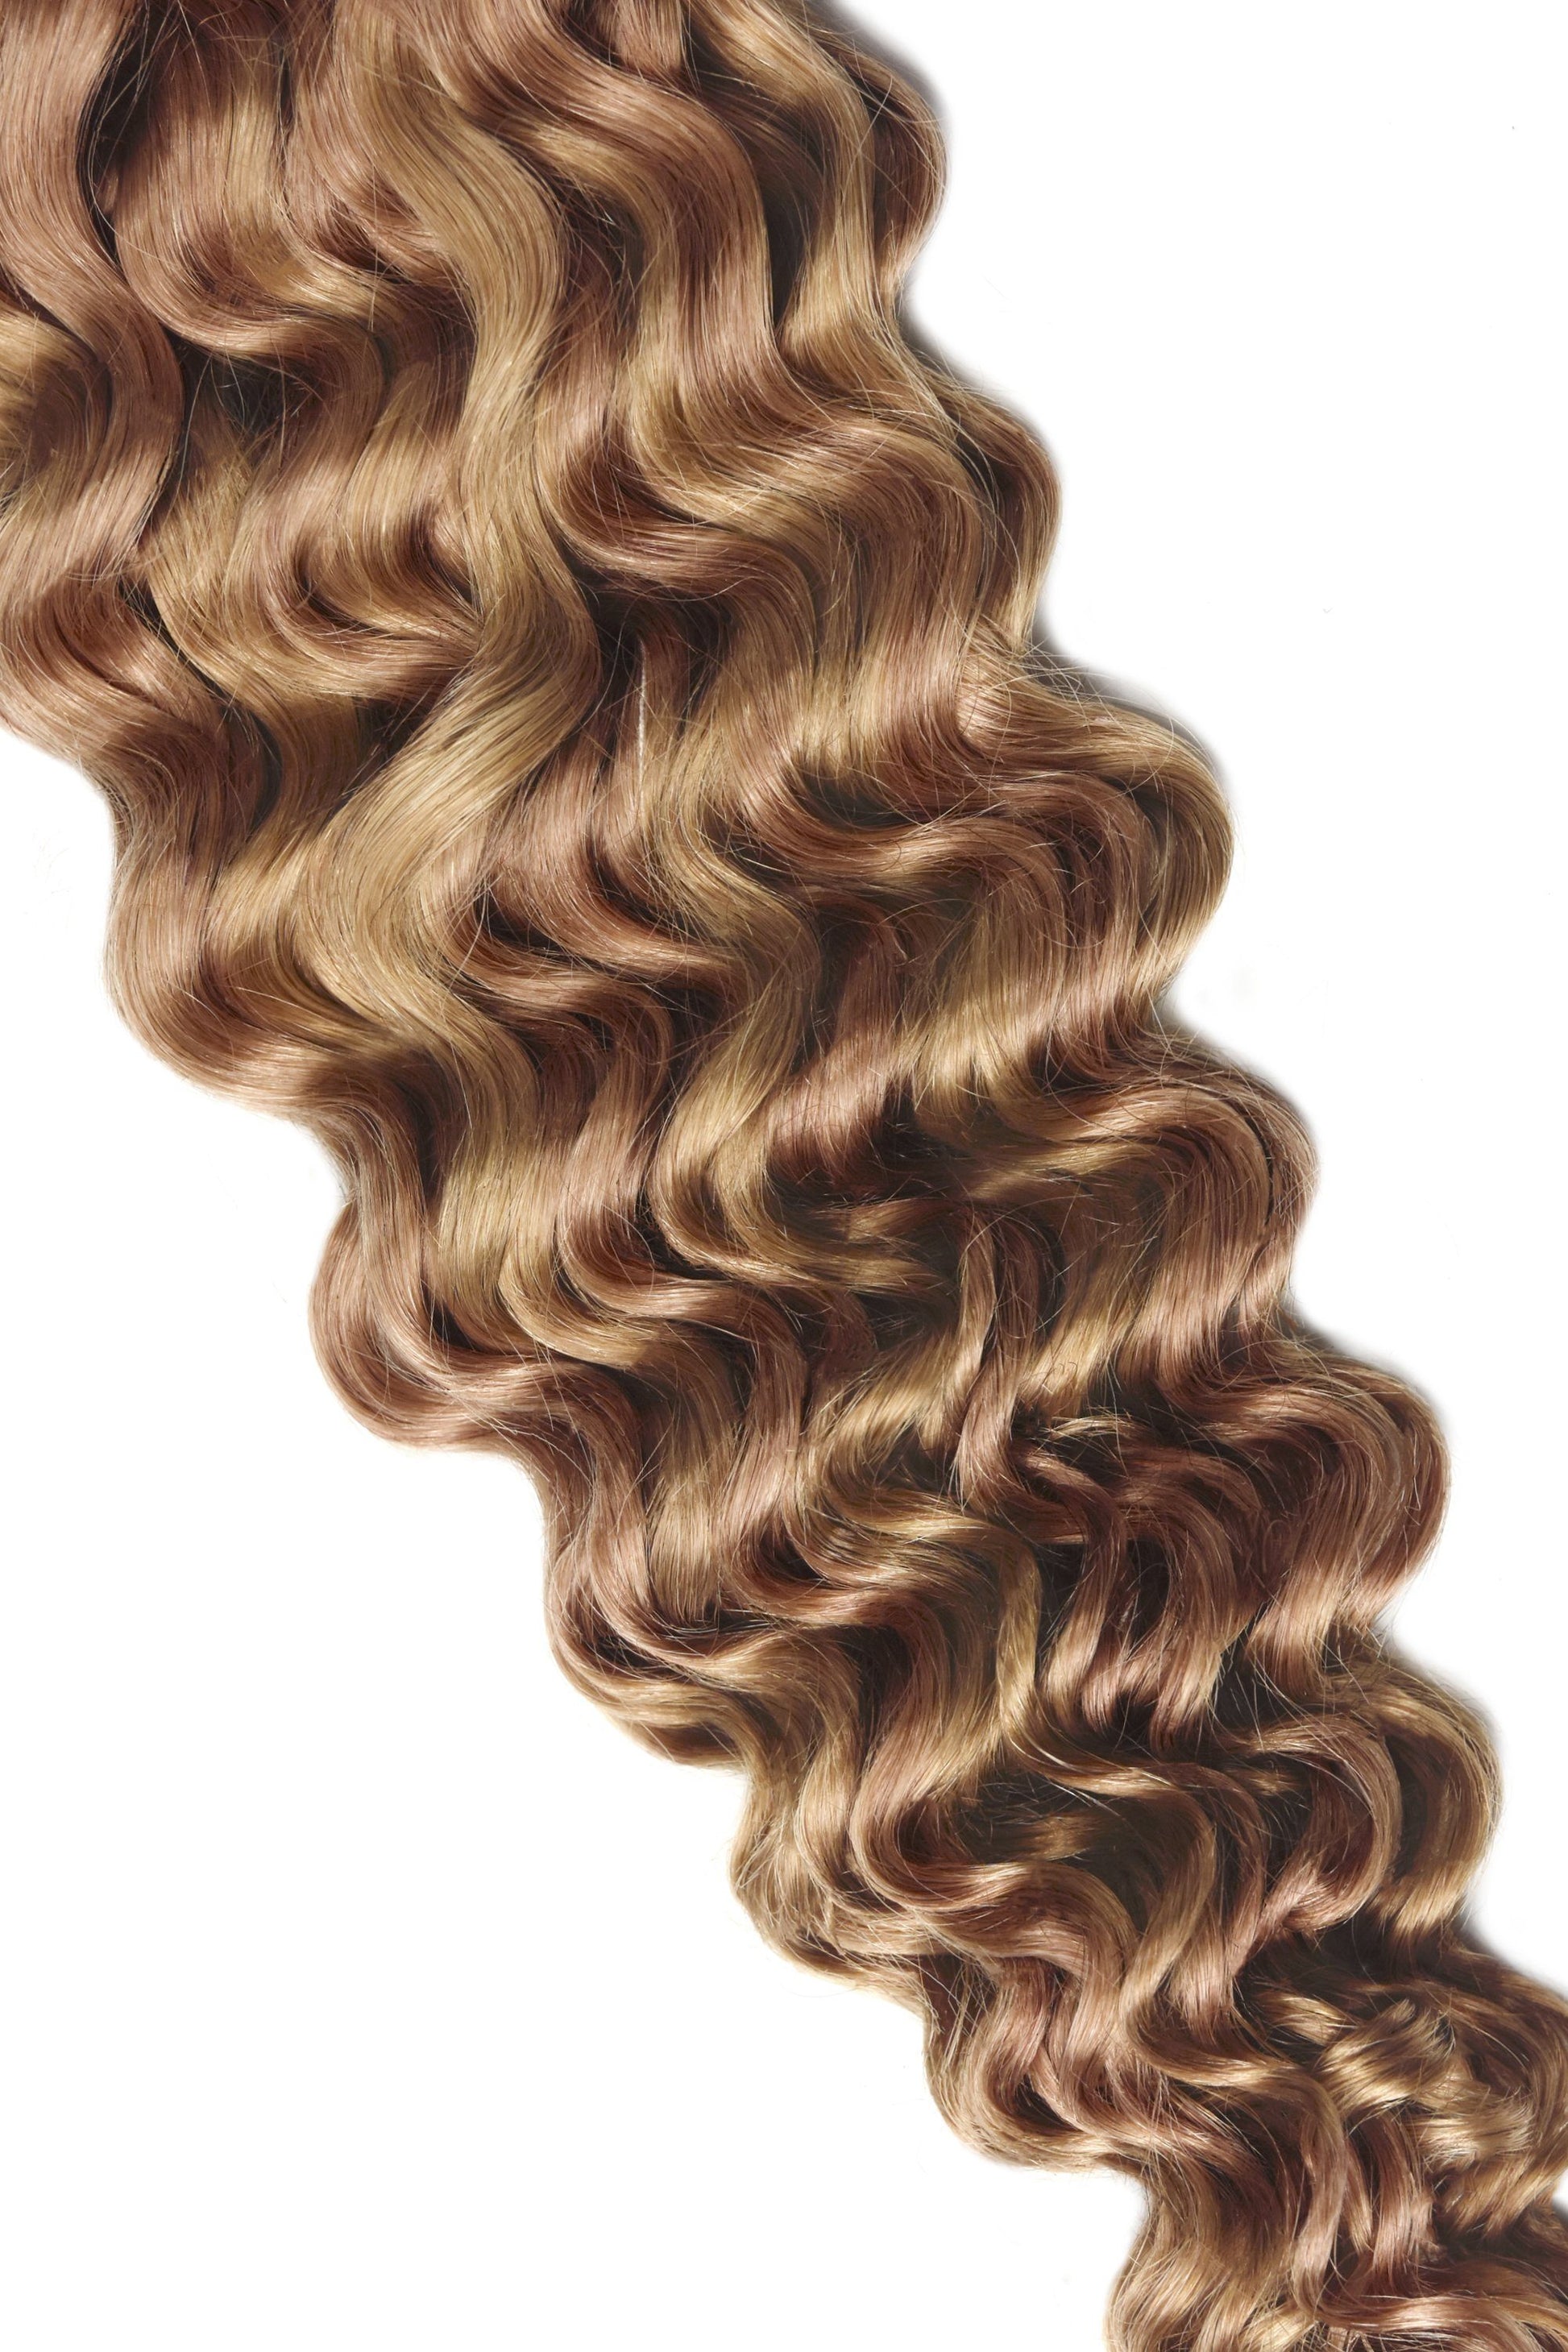 Curly Full Head Remy Clip in Human Hair Extensions #27/30 Curly Clip In Hair Extensions cliphair 